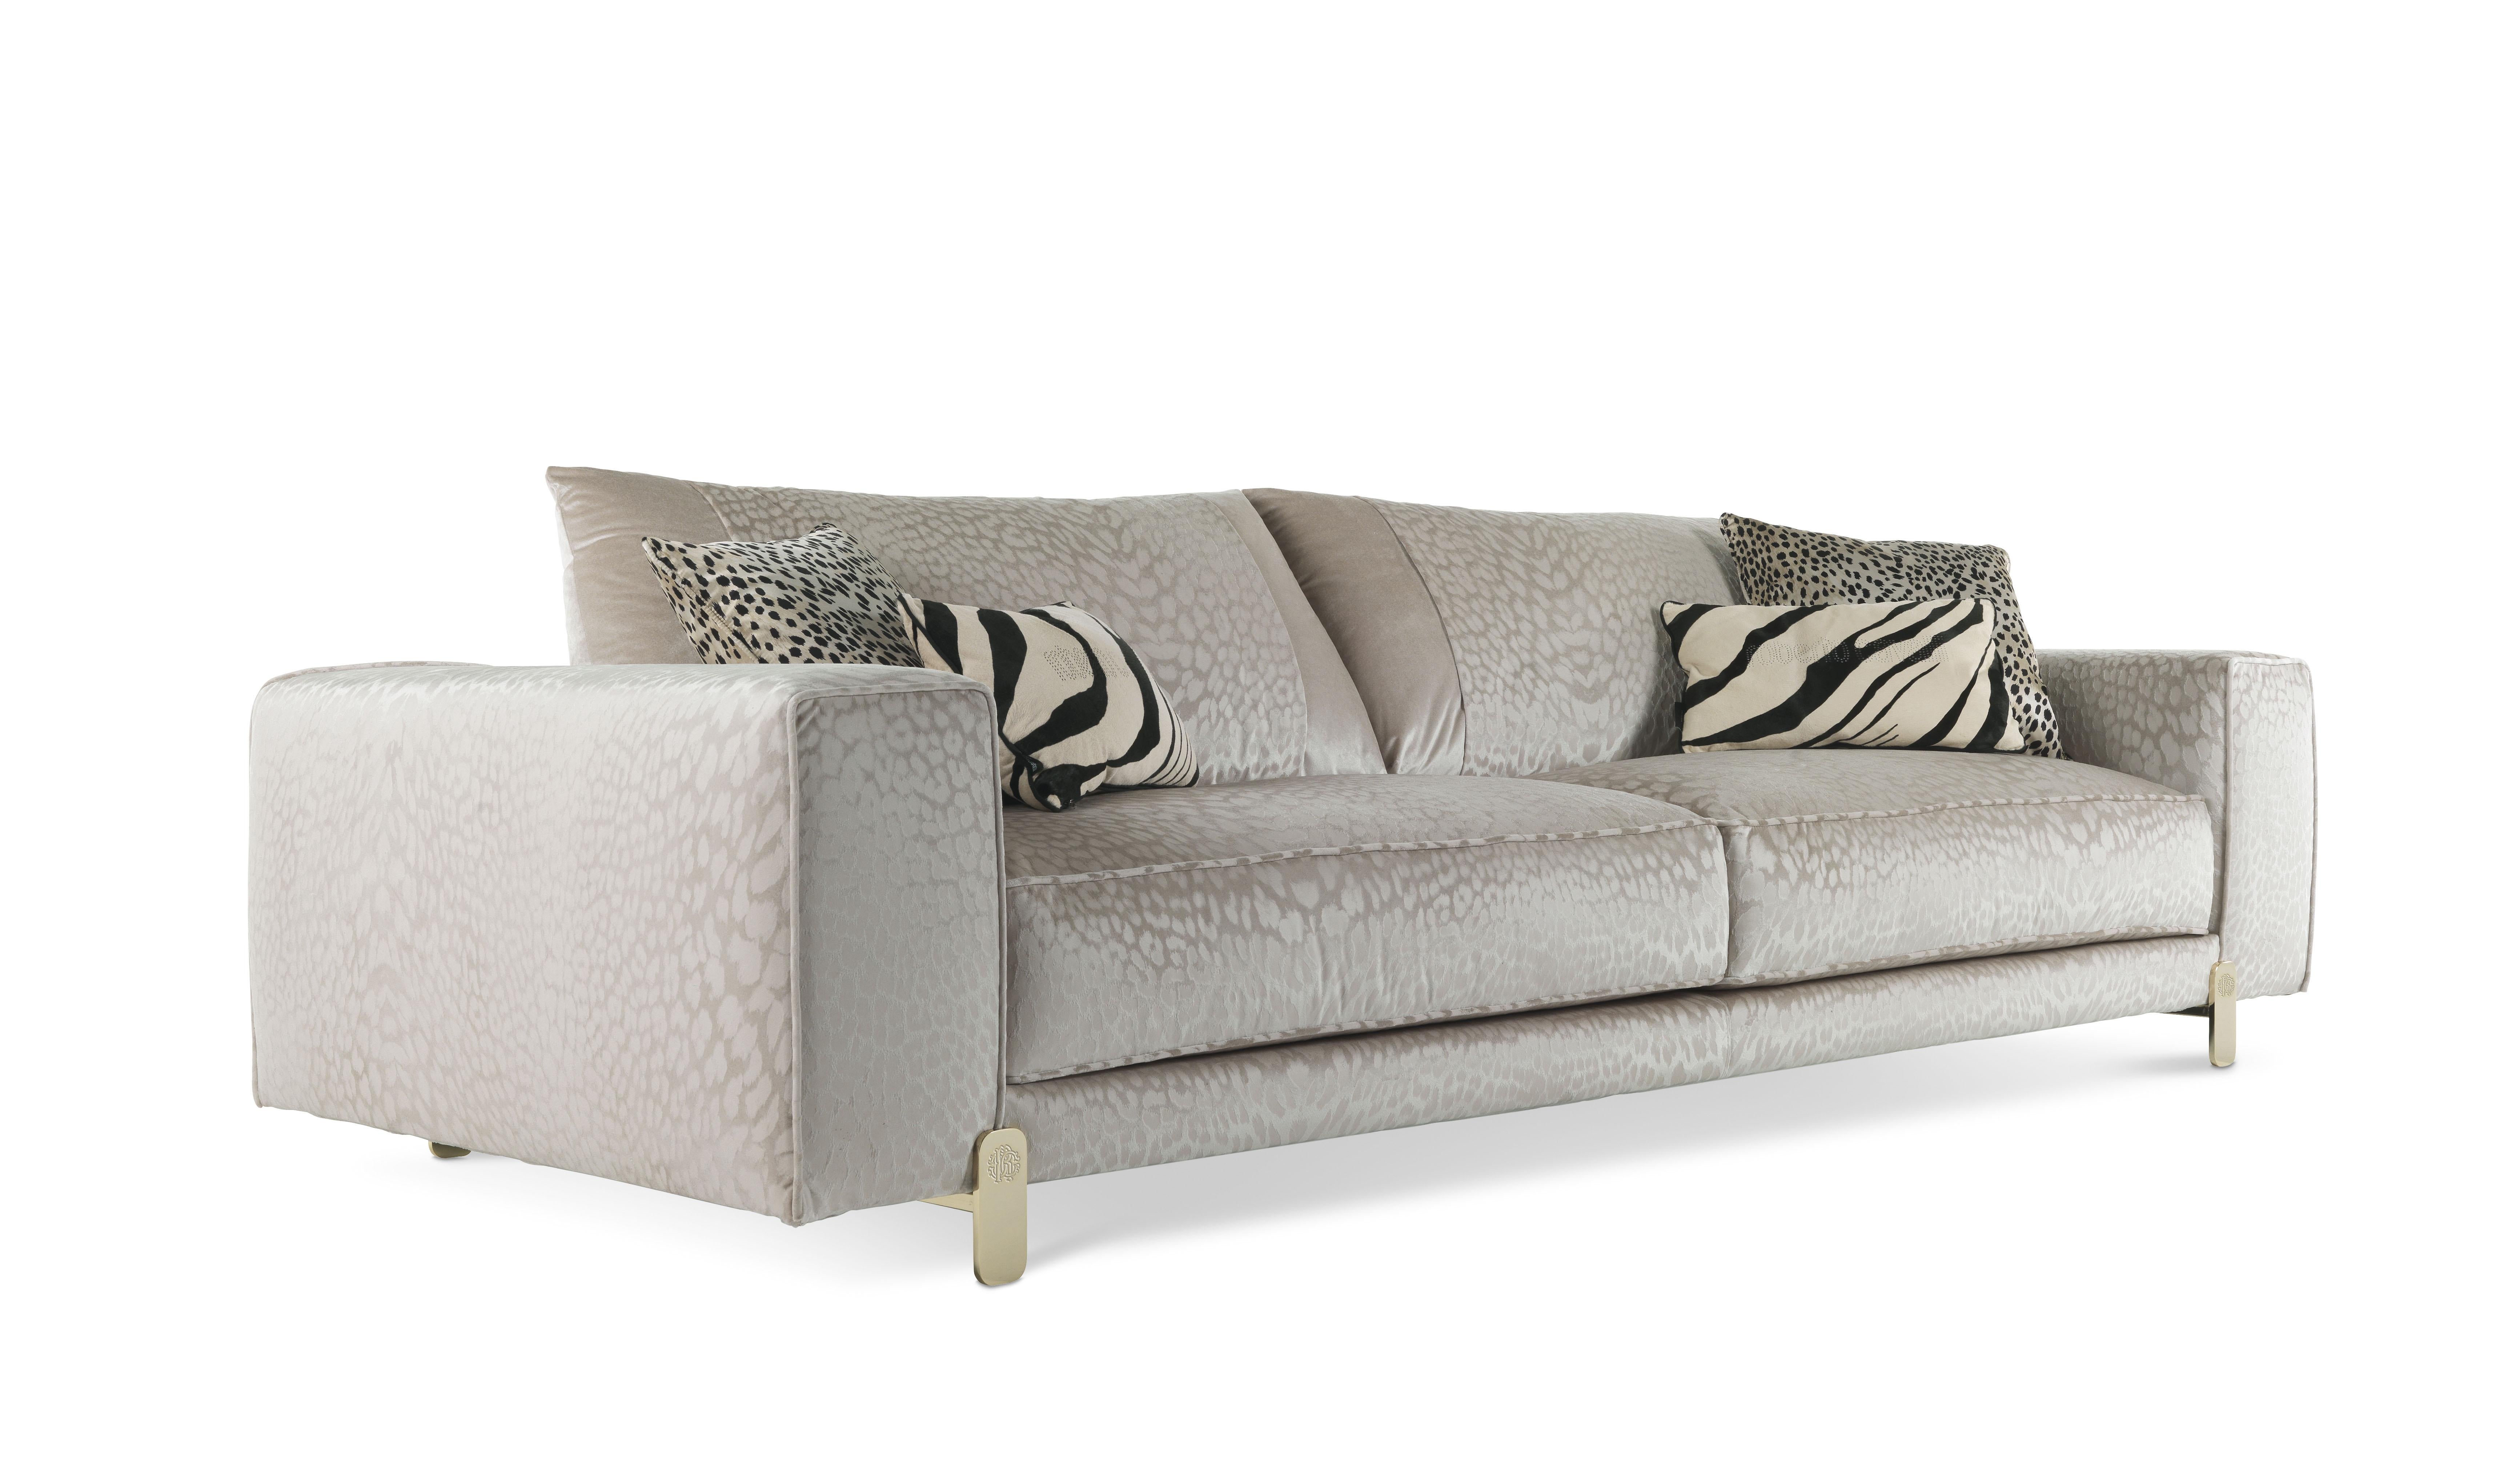 In the Caicos sofa, the simple and linear shapes acquire a bold and seductive charm. The upholstery with fabrics or leathers of the collection, characterized by the presence of the iconic patterns of the Maison, such as the animalier designs, meet